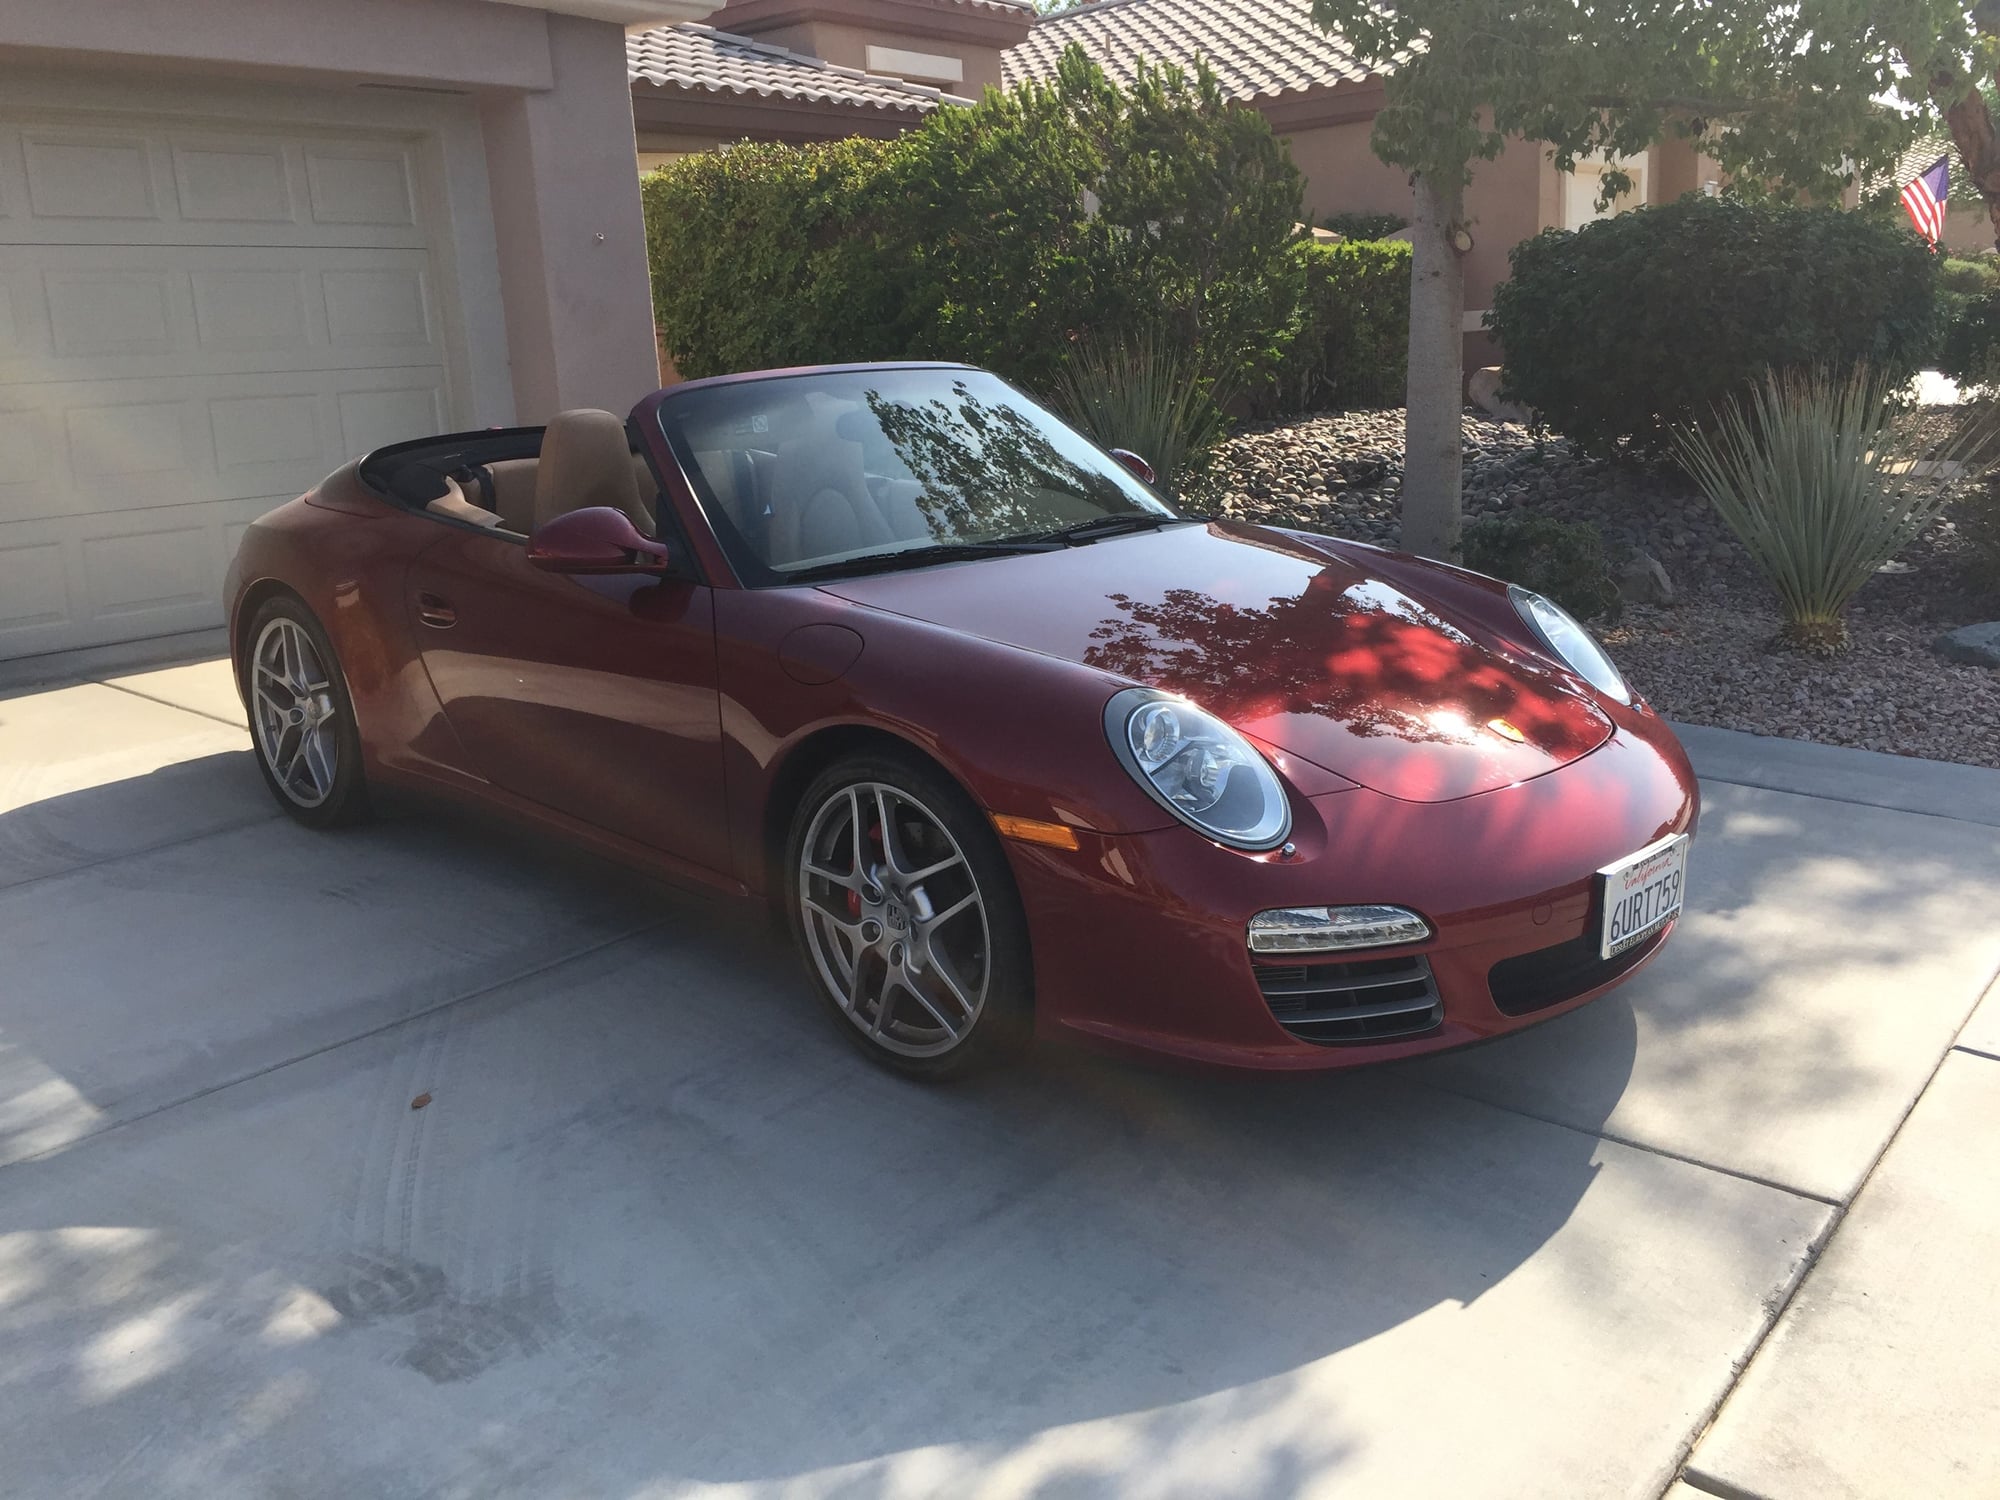 2009 Porsche 911 - 2009 C4S Cabriolet PDK; low miles; red - Used - VIN WP0CB29979S754583 - 19,200 Miles - 6 cyl - AWD - Automatic - Convertible - Red - Santa Monica, CA 90405, United States